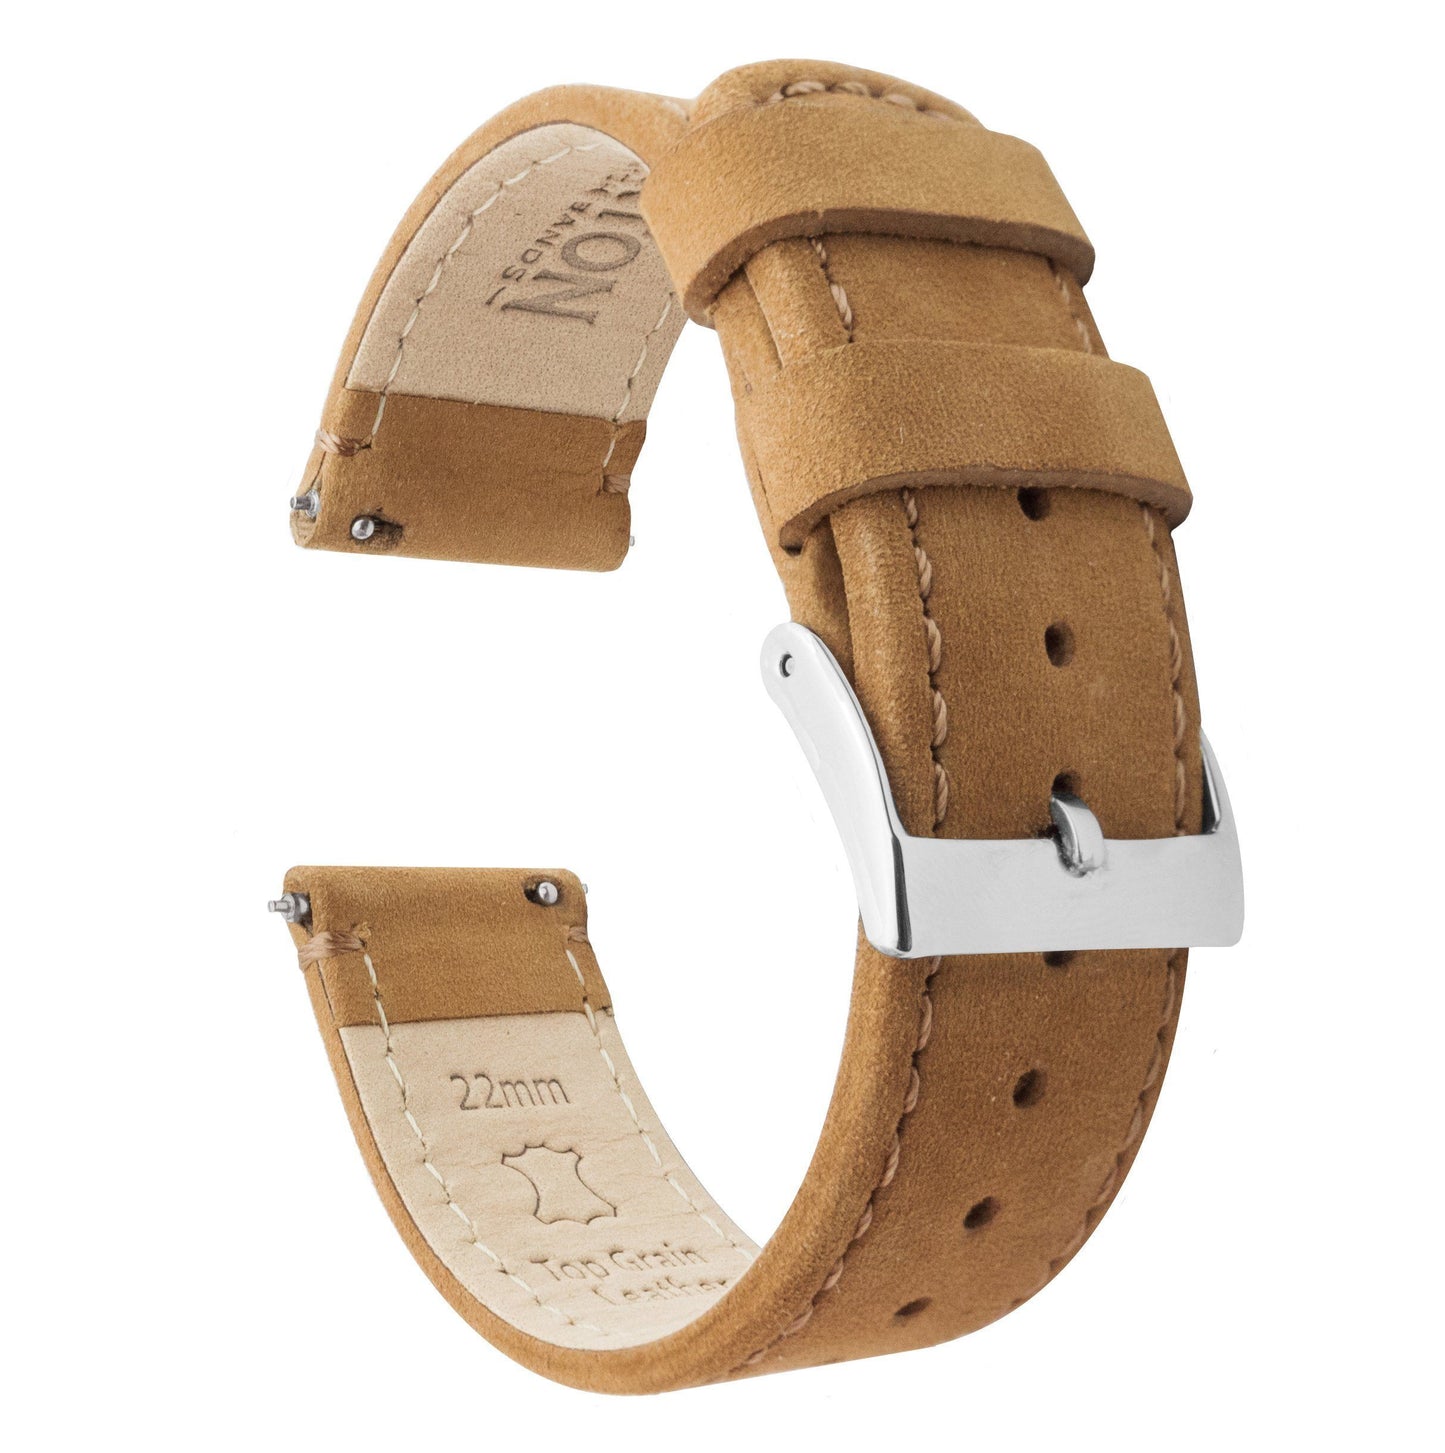 Pebble Smart Watches | Gingerbread Brown Leather & Stitching - Barton Watch Bands